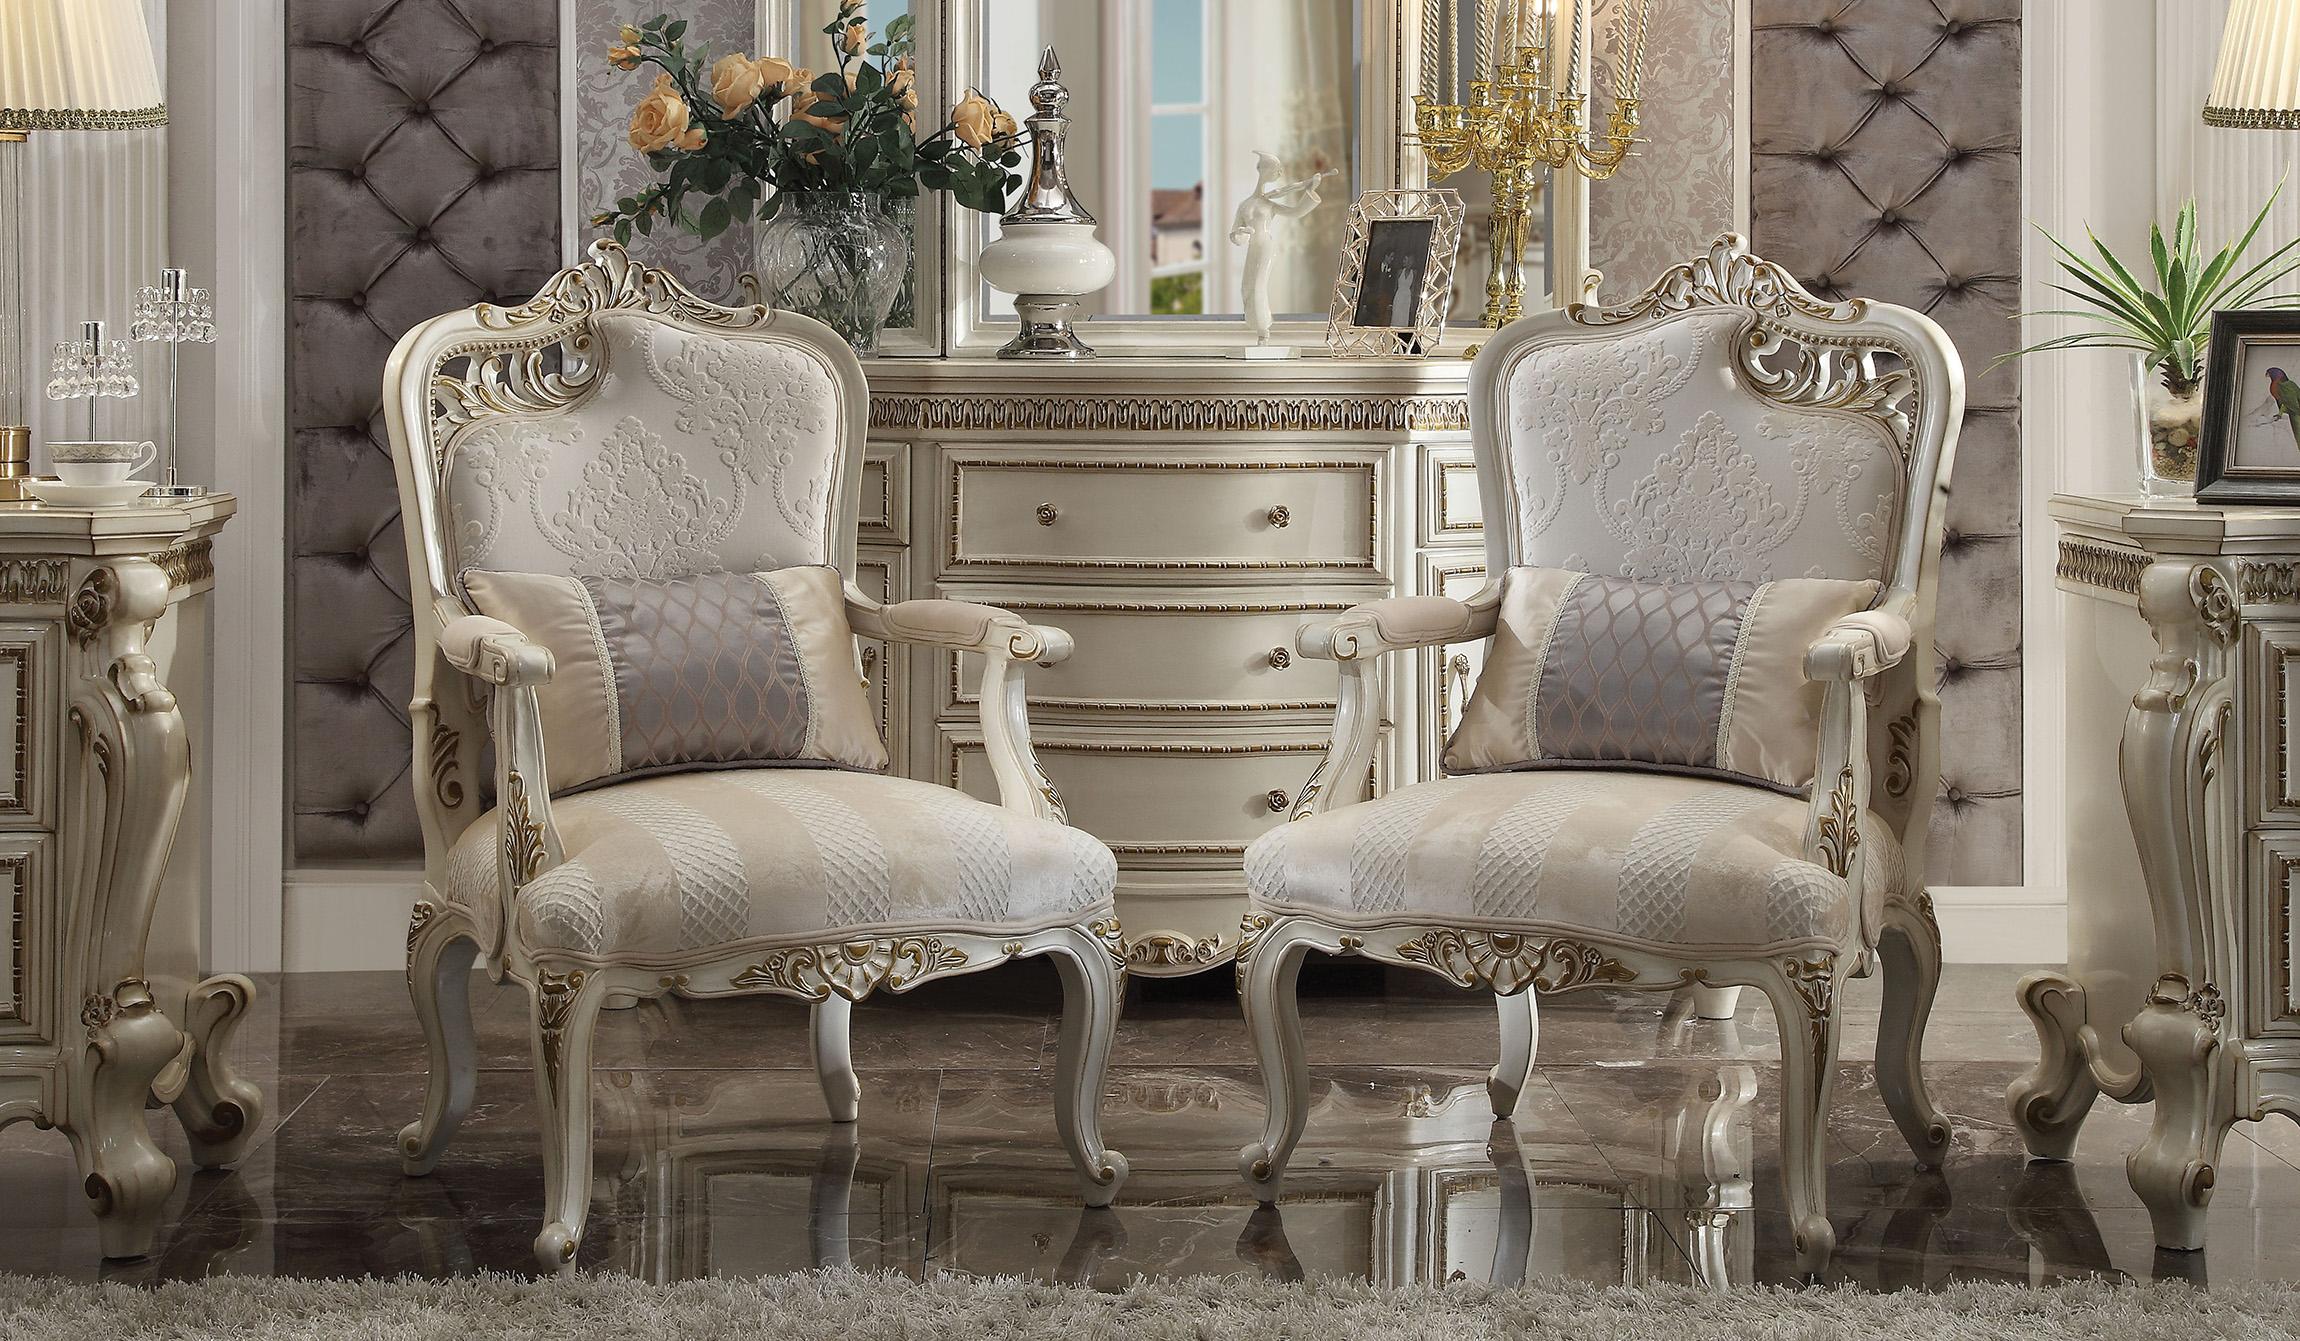 Classic, Traditional Accent Chair Set Picardy II 56883 56883-Set-2-Picardy II in Pearl, Antique Fabric